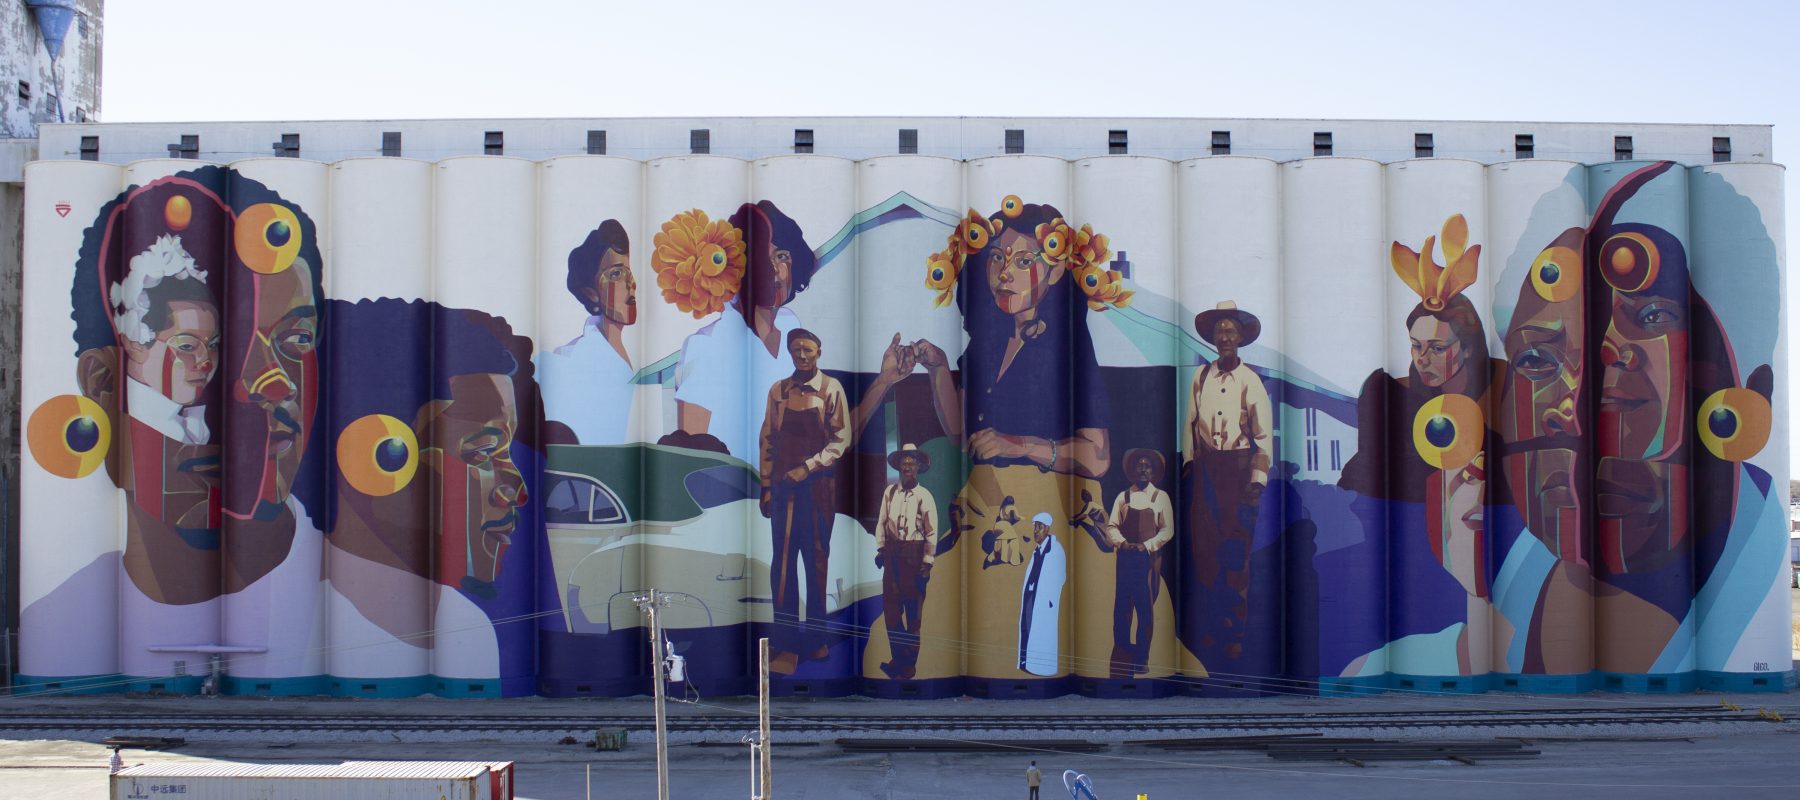 A huge mural is painted on the side of a grain elevator, featuring a variety of men and women of many backgrounds.